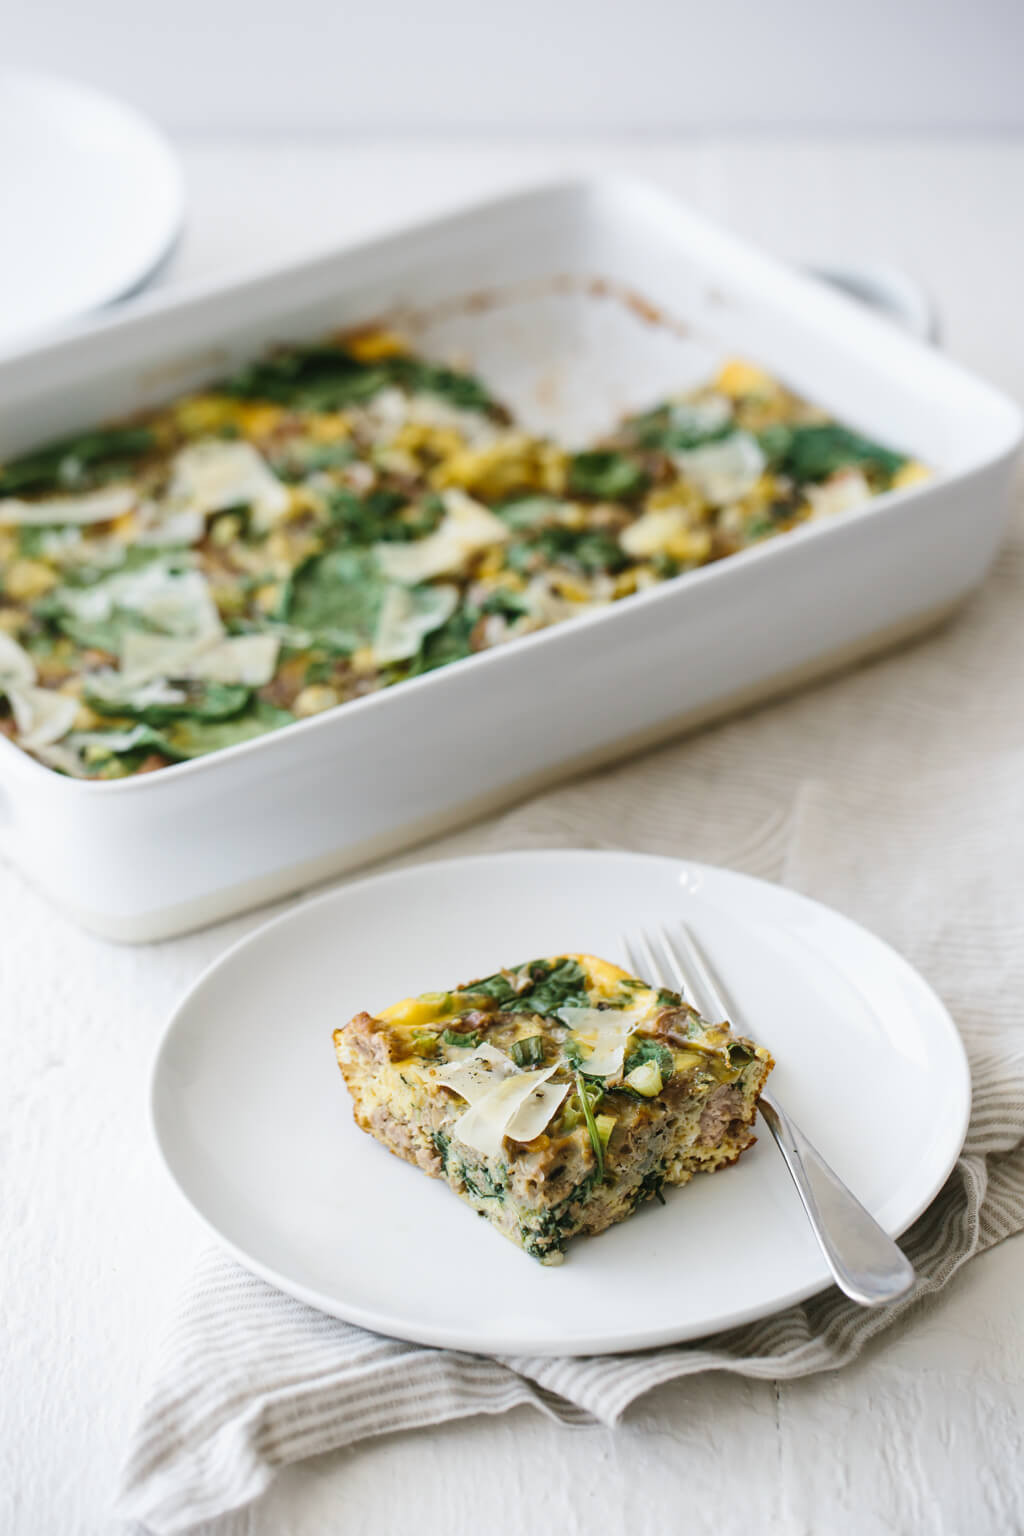 Healthy Breakfast Casserole With Spinach
 healthy breakfast casserole with spinach